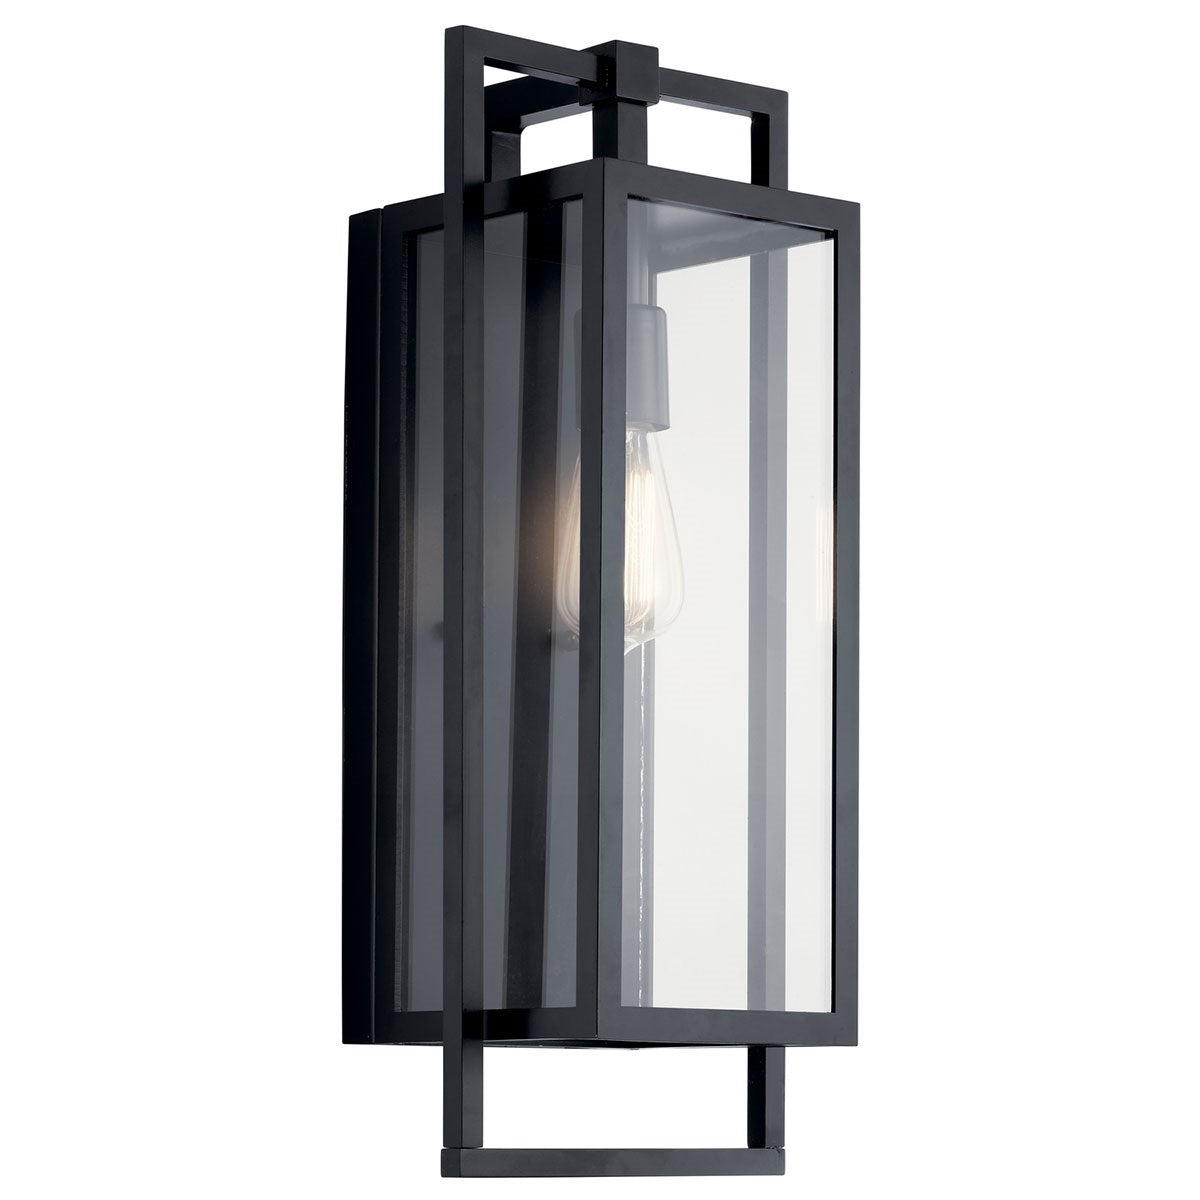 Goson 20 in. Outdoor Wall Sconce Black Finish